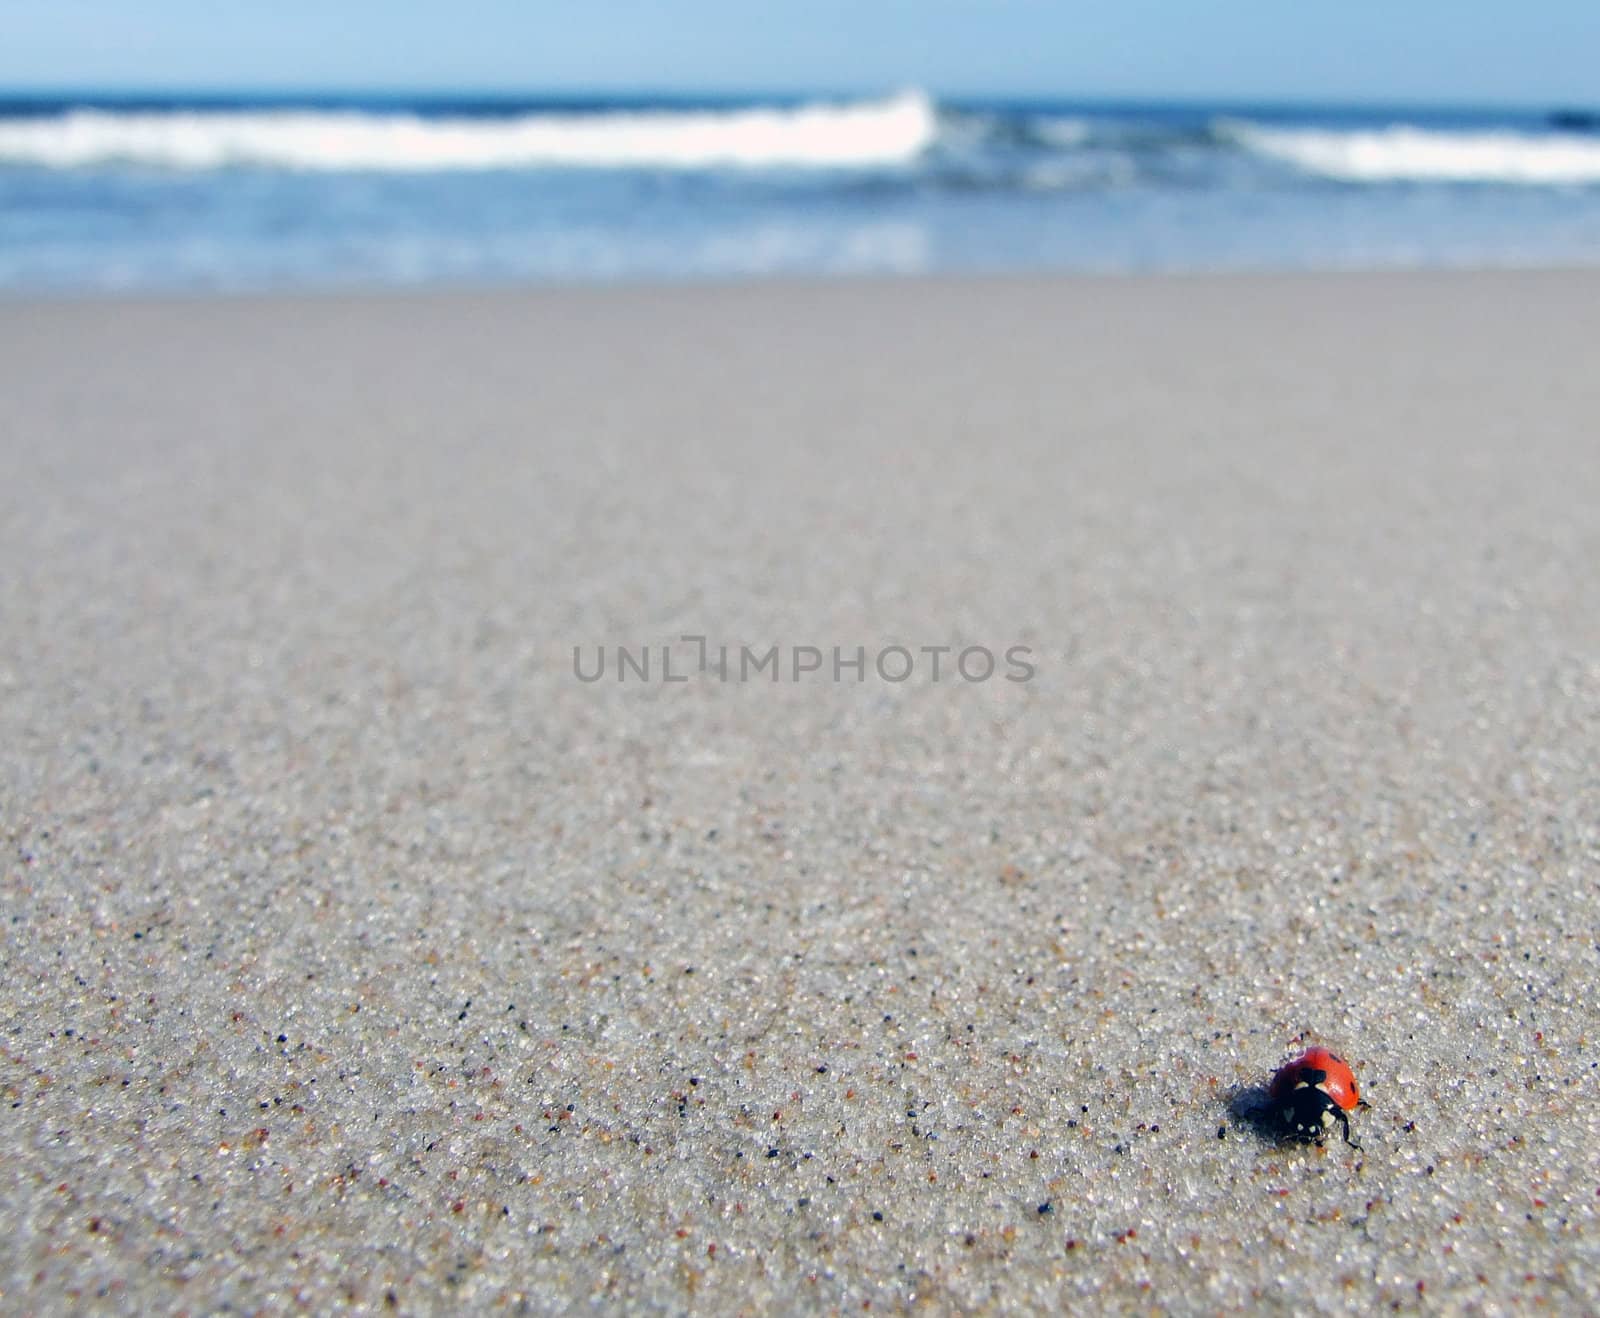 Ladybird on the beach by whiteowl